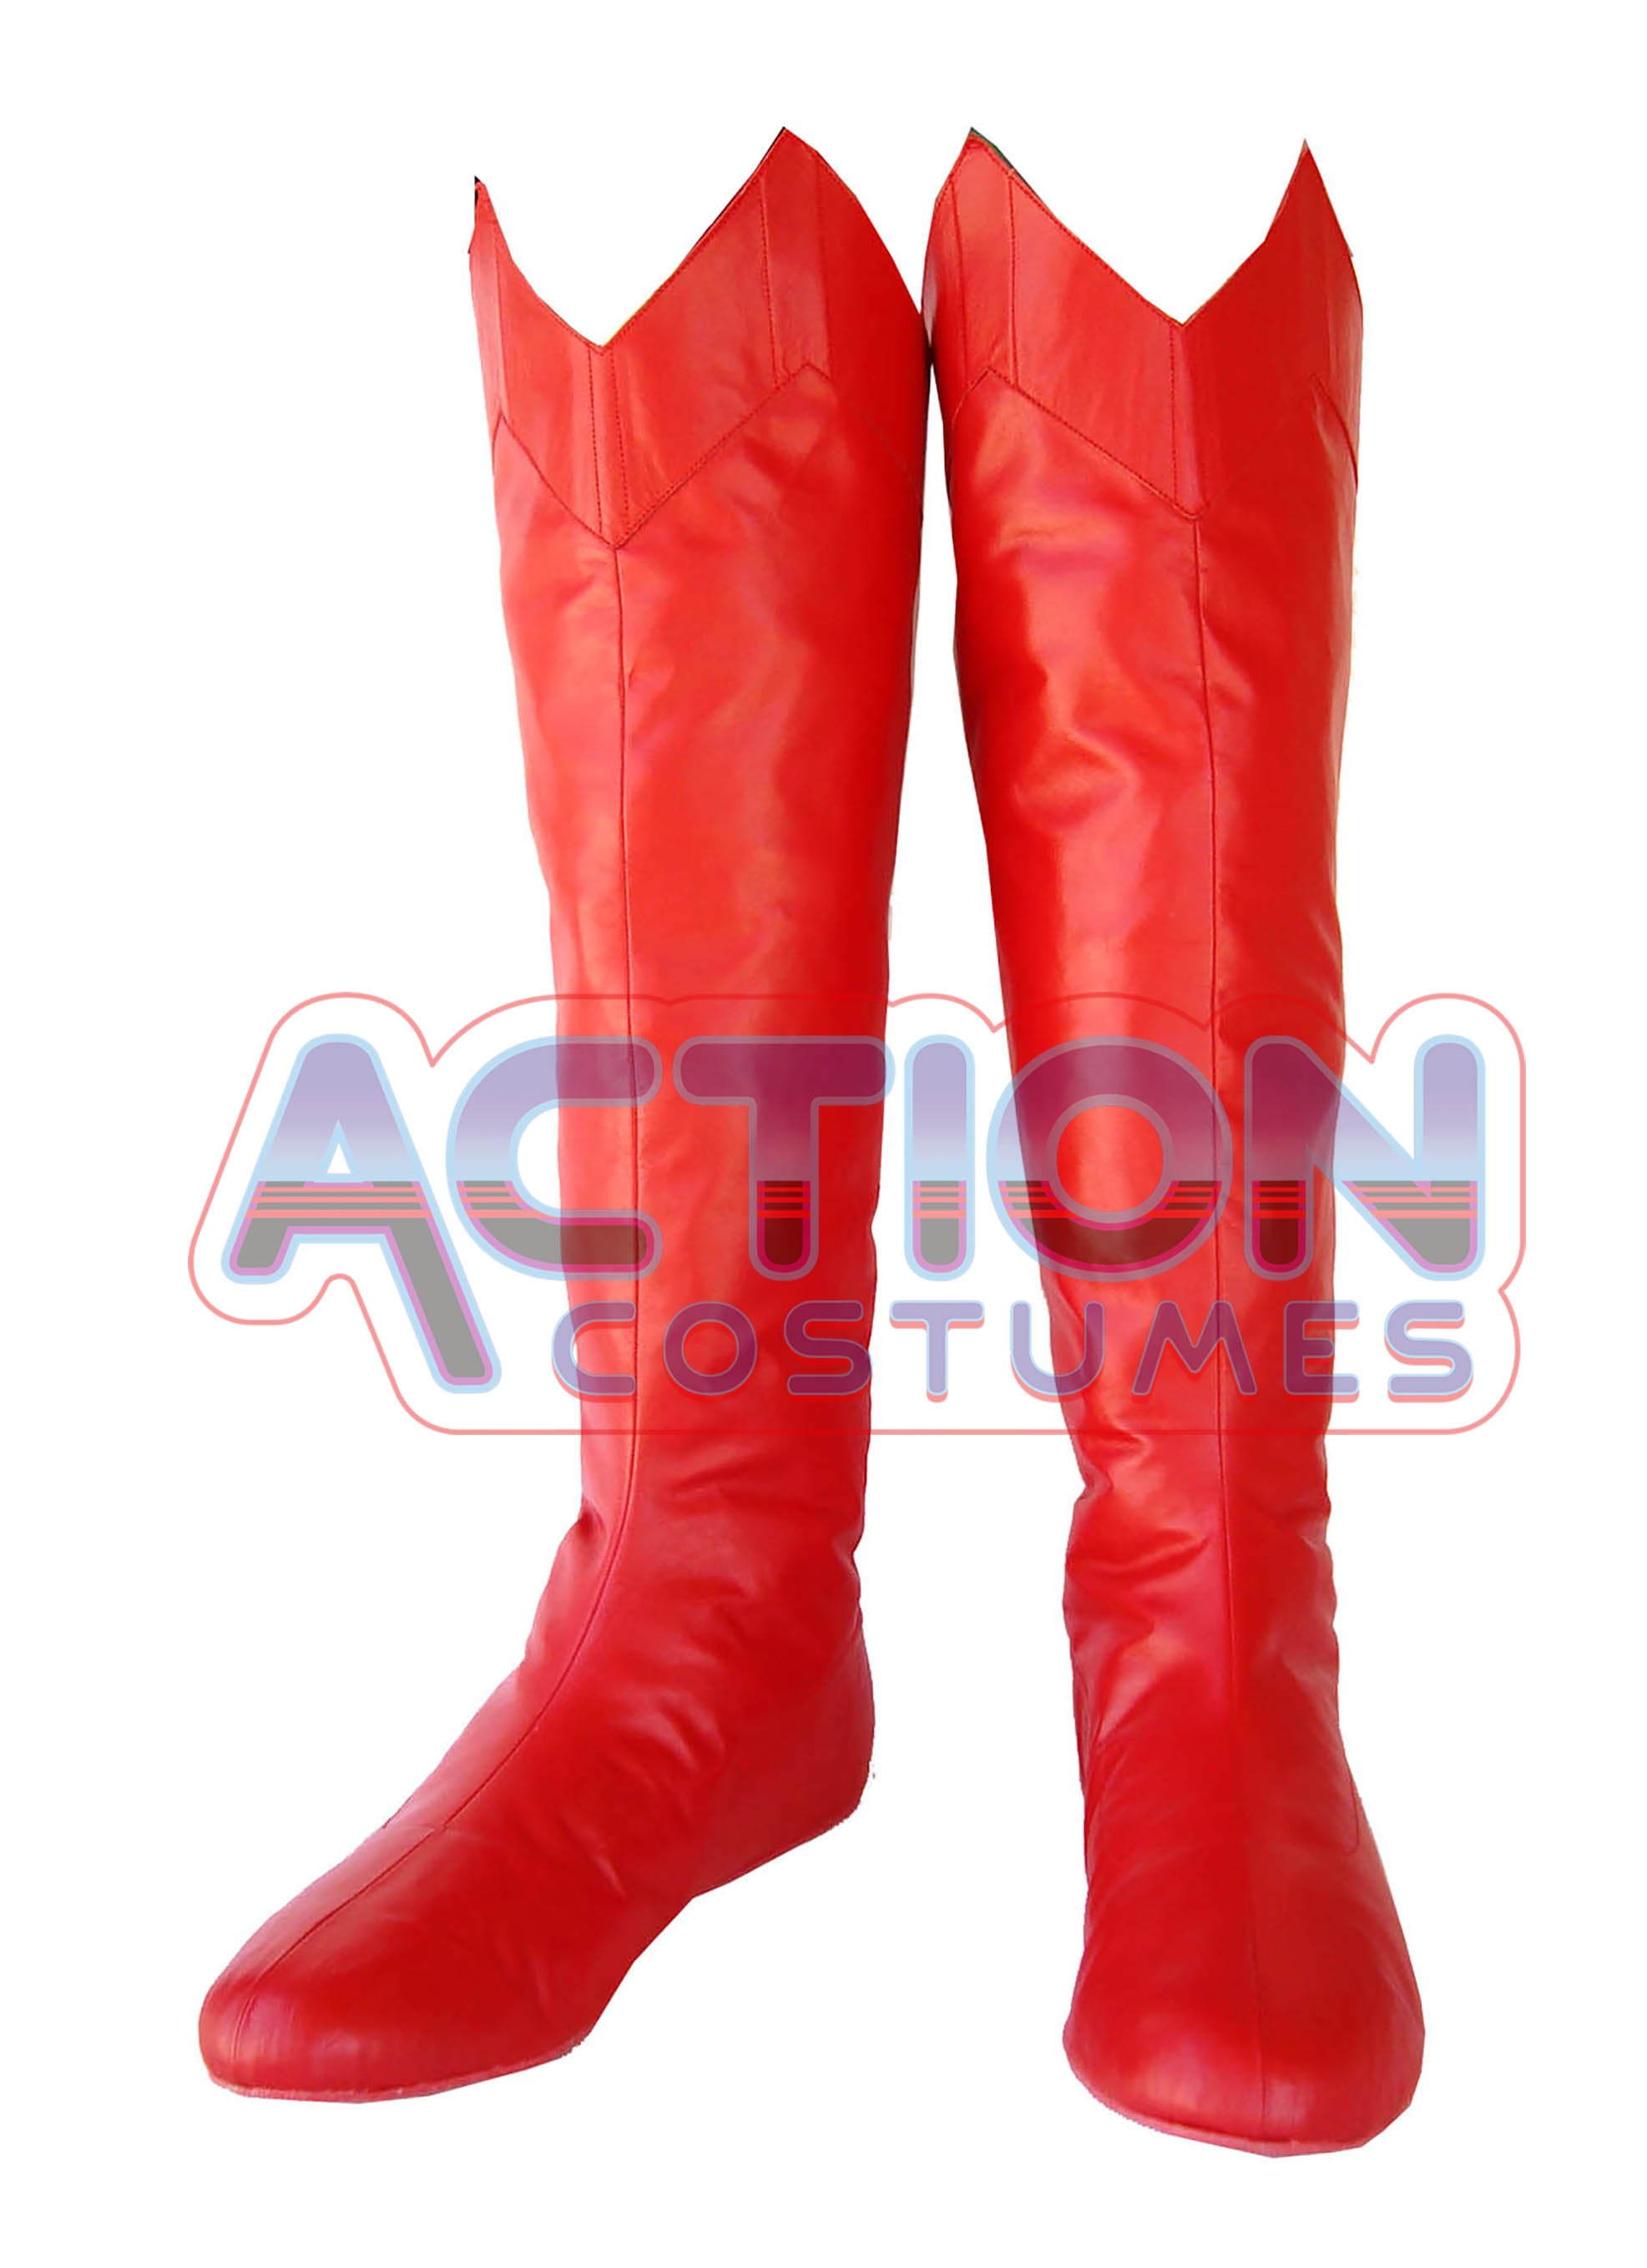 superman-deluxe-boots-70s-style-christopher-reeve-size-ready-to-ship